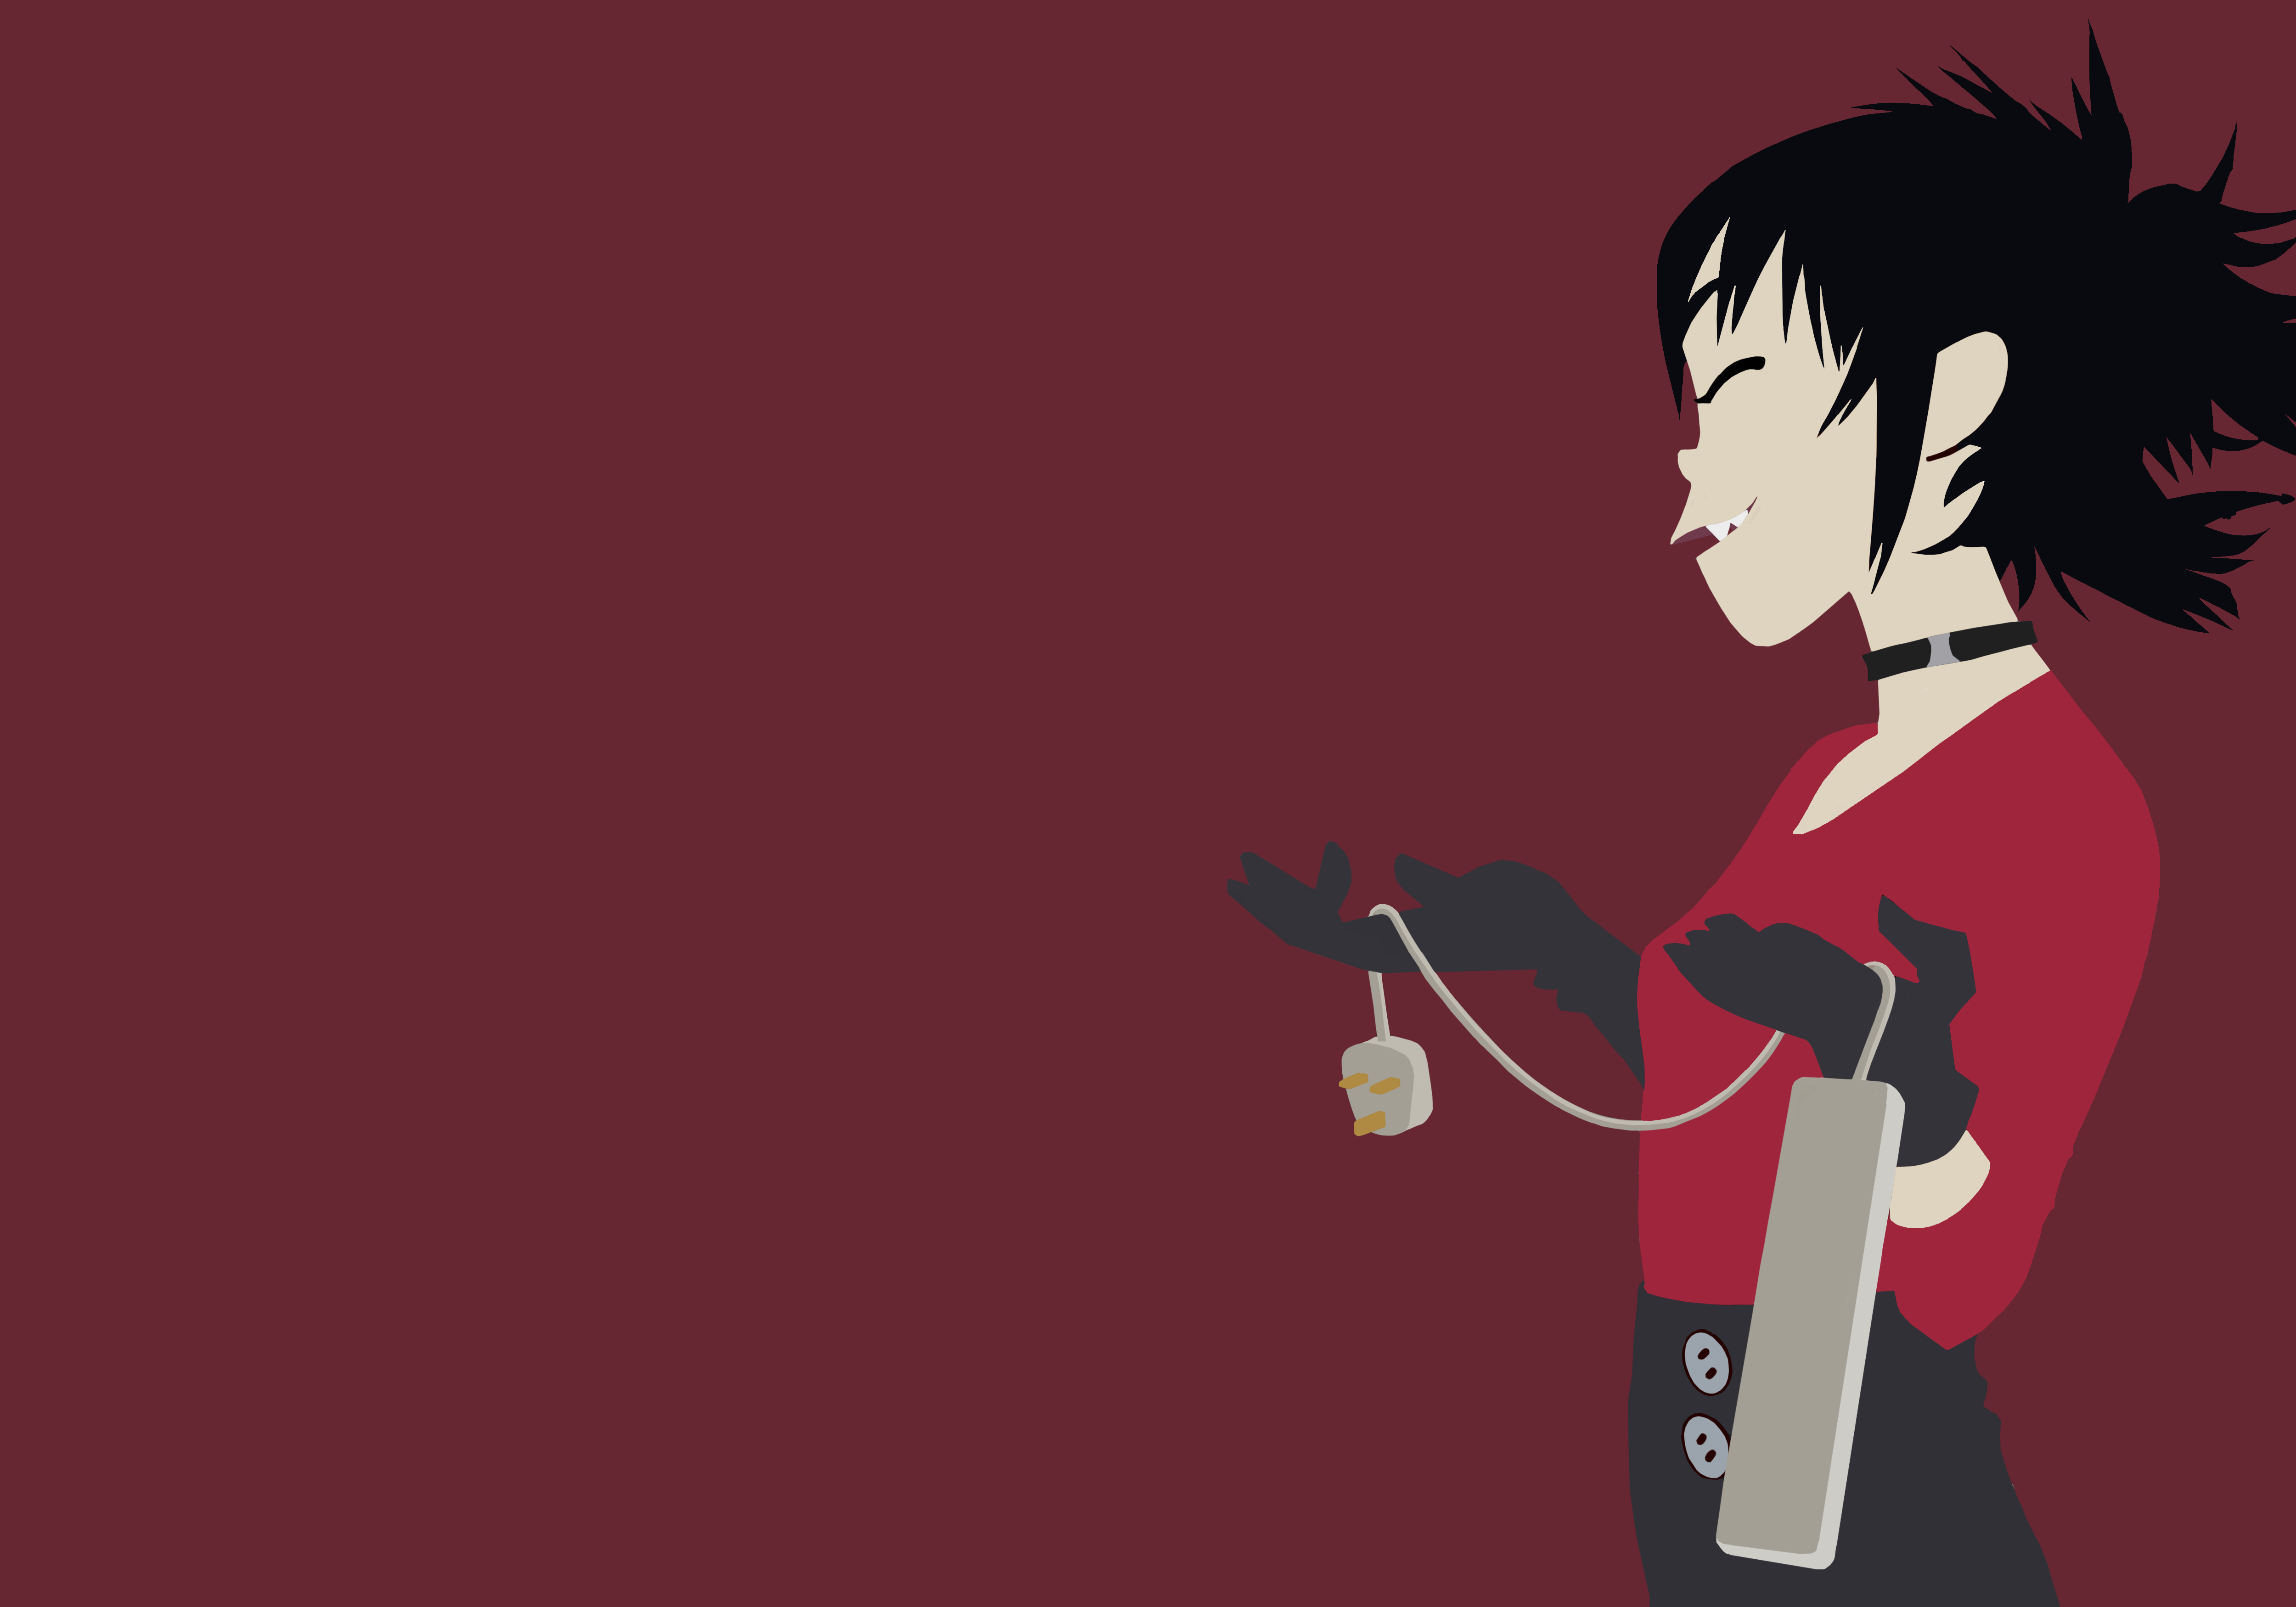 I Attempted To Make A Noodle Minimalist Wallpaper